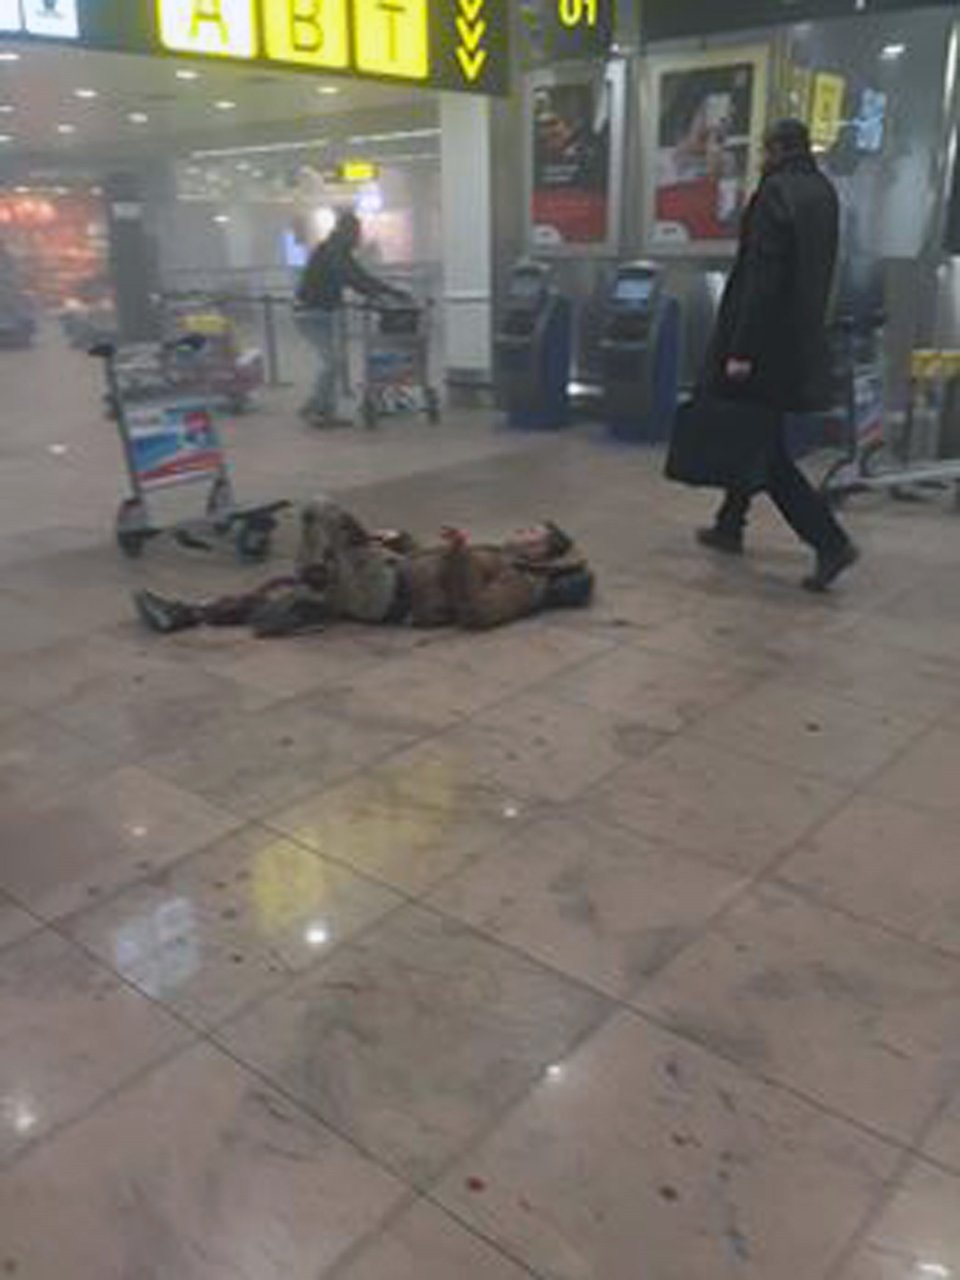 In this photo provided by Georgian Public Broadcaster and photographed by Ketevan Kardava a man is wounded in Brussels Airport in Brussels, Belgium, after explosions were heard Tuesday, March 22, 2016. A developing situation left at least one person and possibly more dead in explosions that ripped through the departure hall at Brussels airport Tuesday, police said. All flights were canceled, arriving planes were being diverted and Belgium's terror alert level was raised to maximum, officials said. (Ketevan Kardava/ Georgian Public Broadcaster via AP)